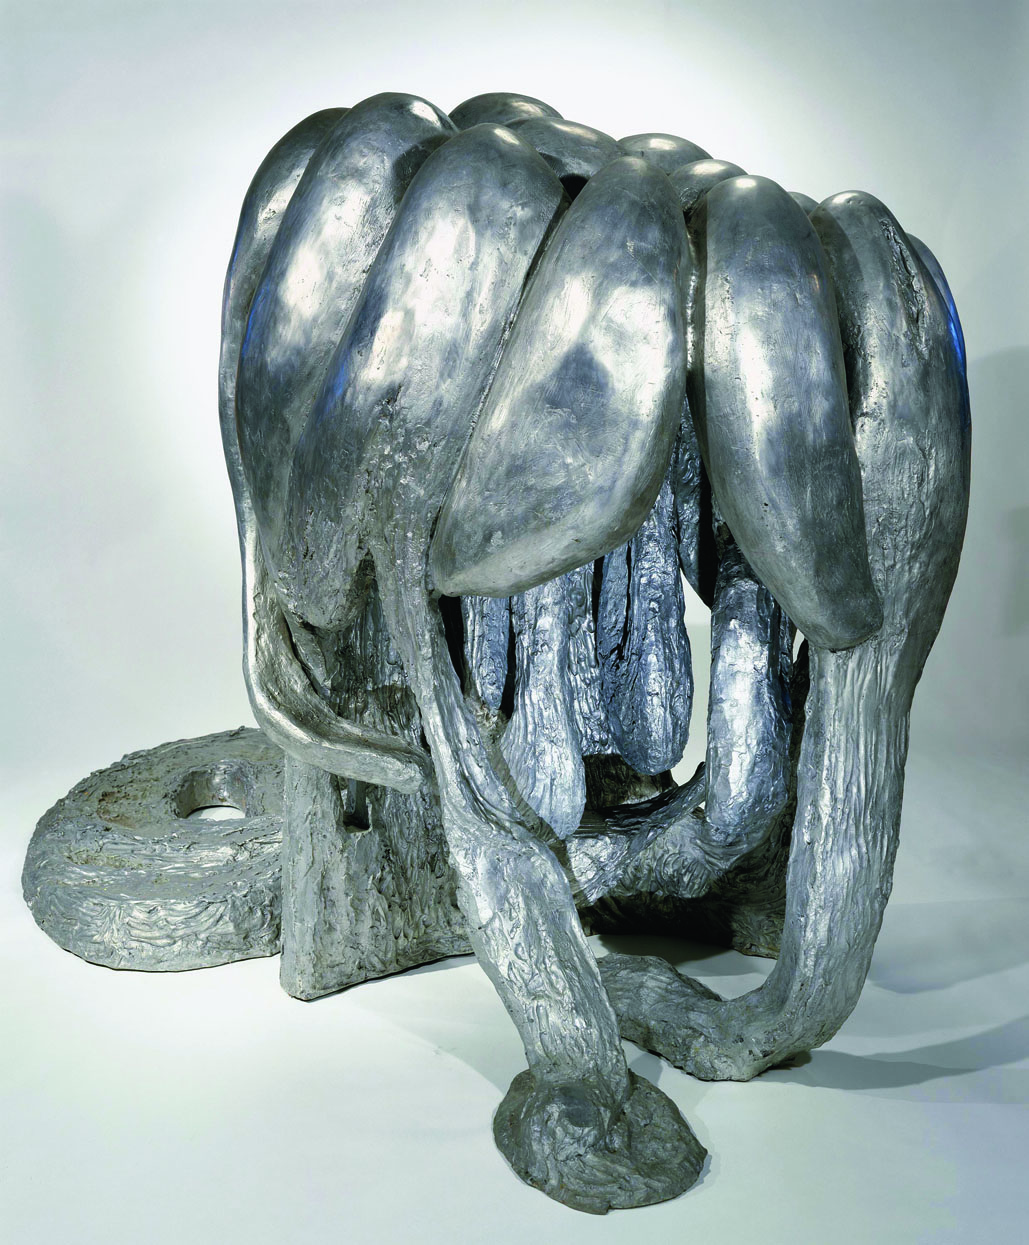 Getting to know Louise Bourgeois